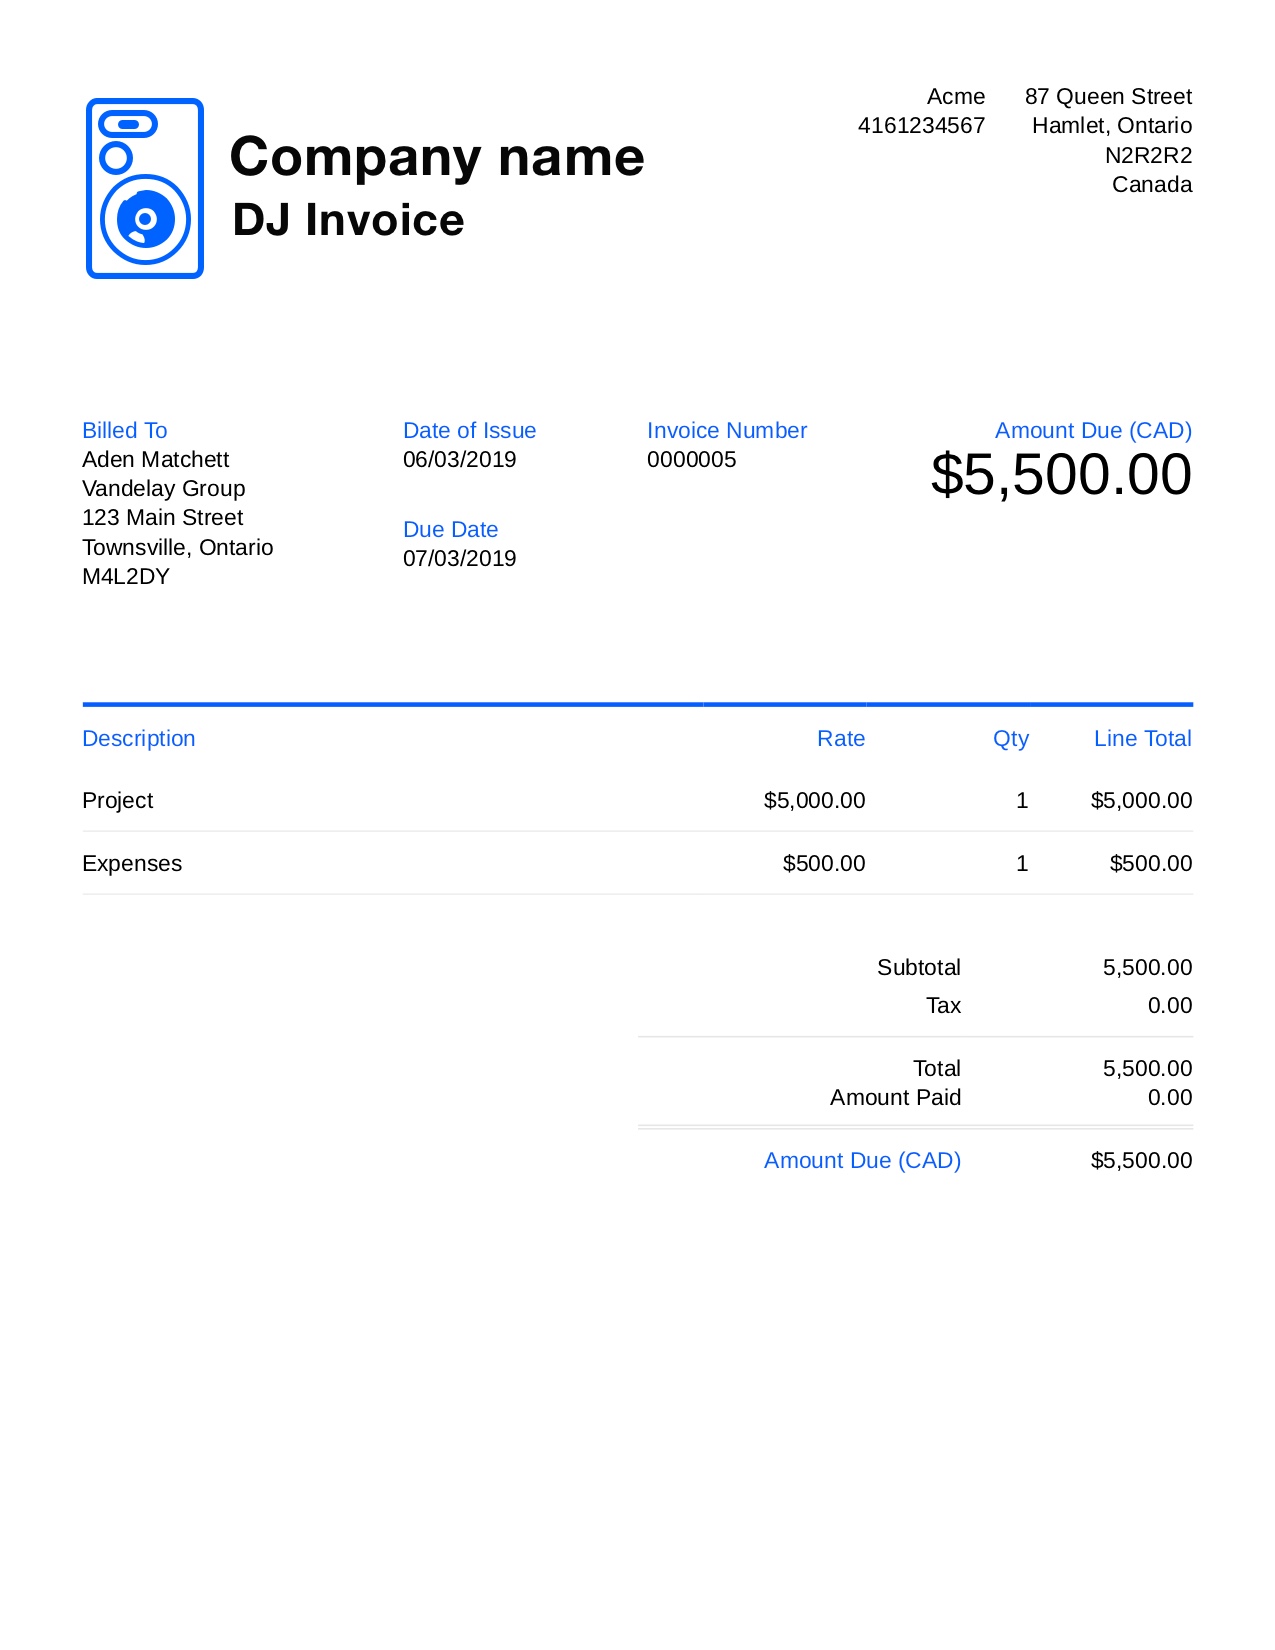 Free Dj Invoice Template. Customize and Send in 21 Seconds Intended For Quickbooks Invoice Templates Free Download